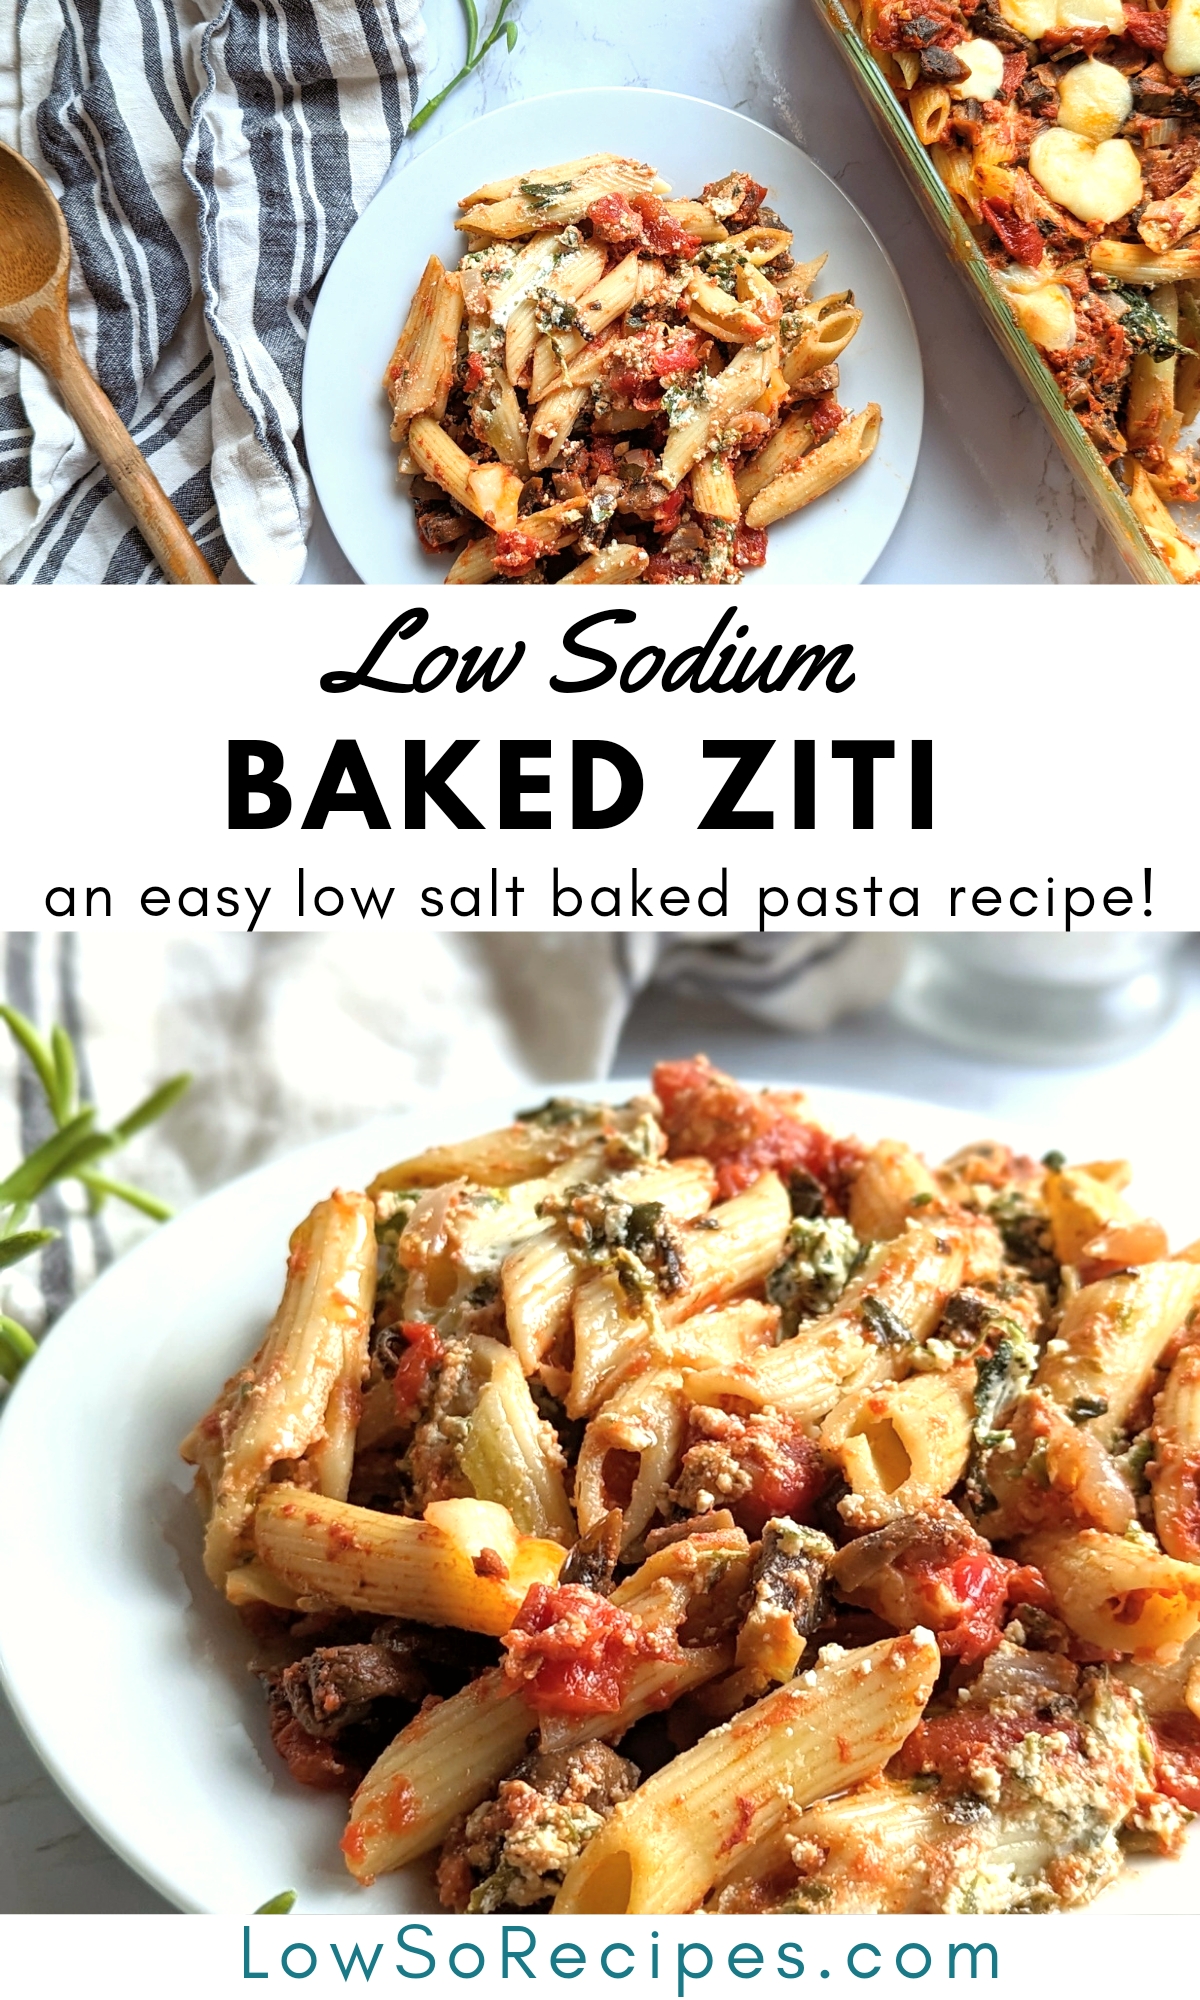 low sodium baked ziti pasta recipe healthy low salt pasta with cheese recipes reduced salt dinner ideas